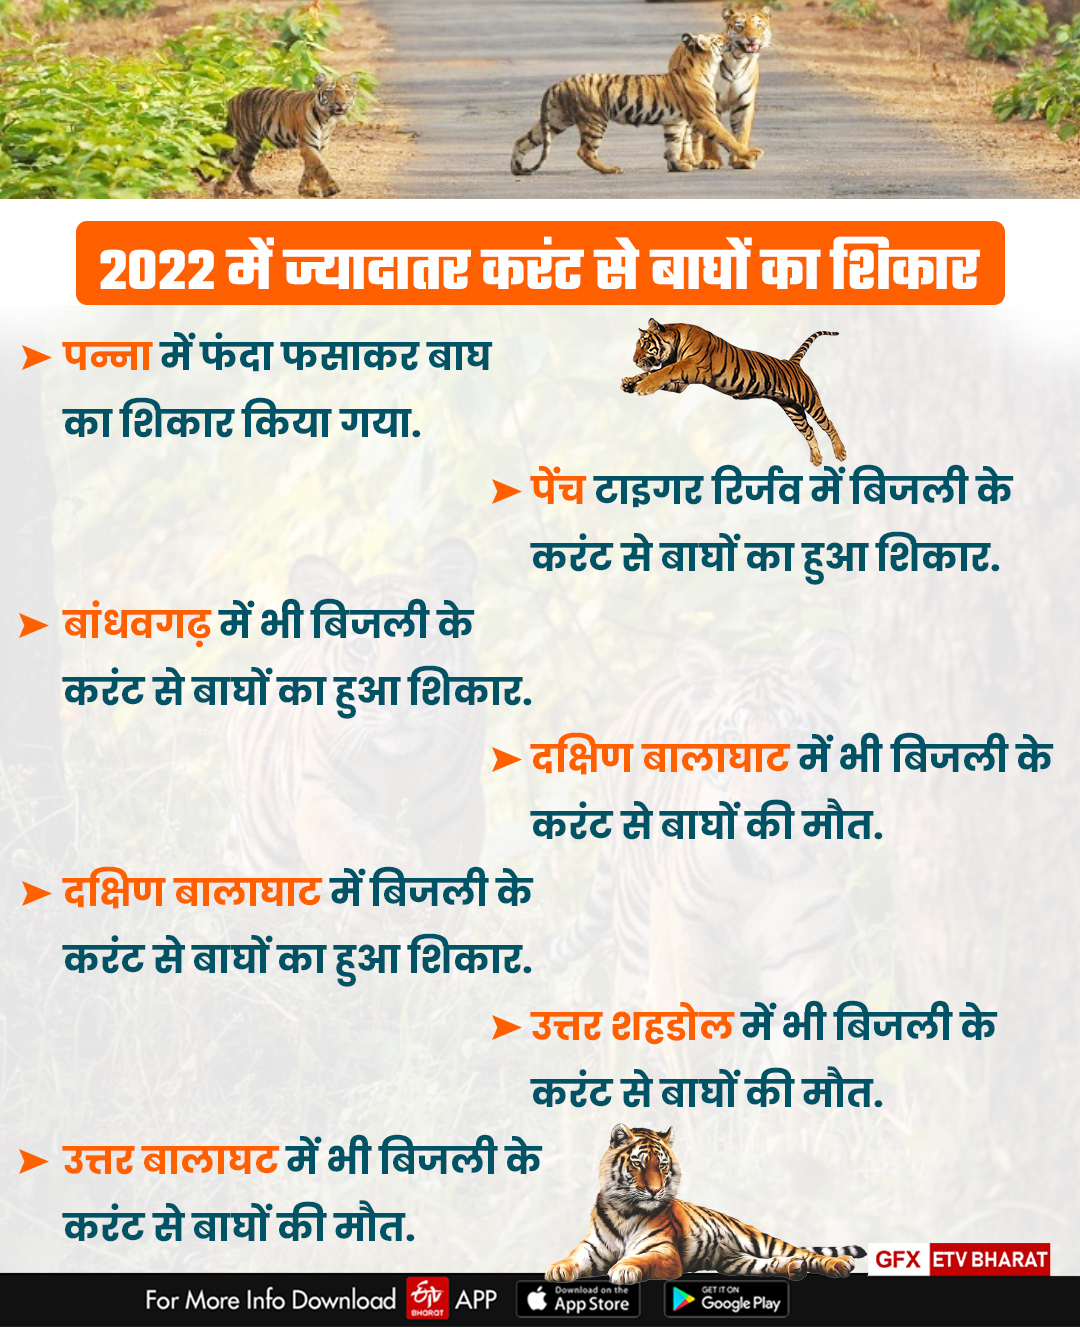 31 tigers died in MP in 2021